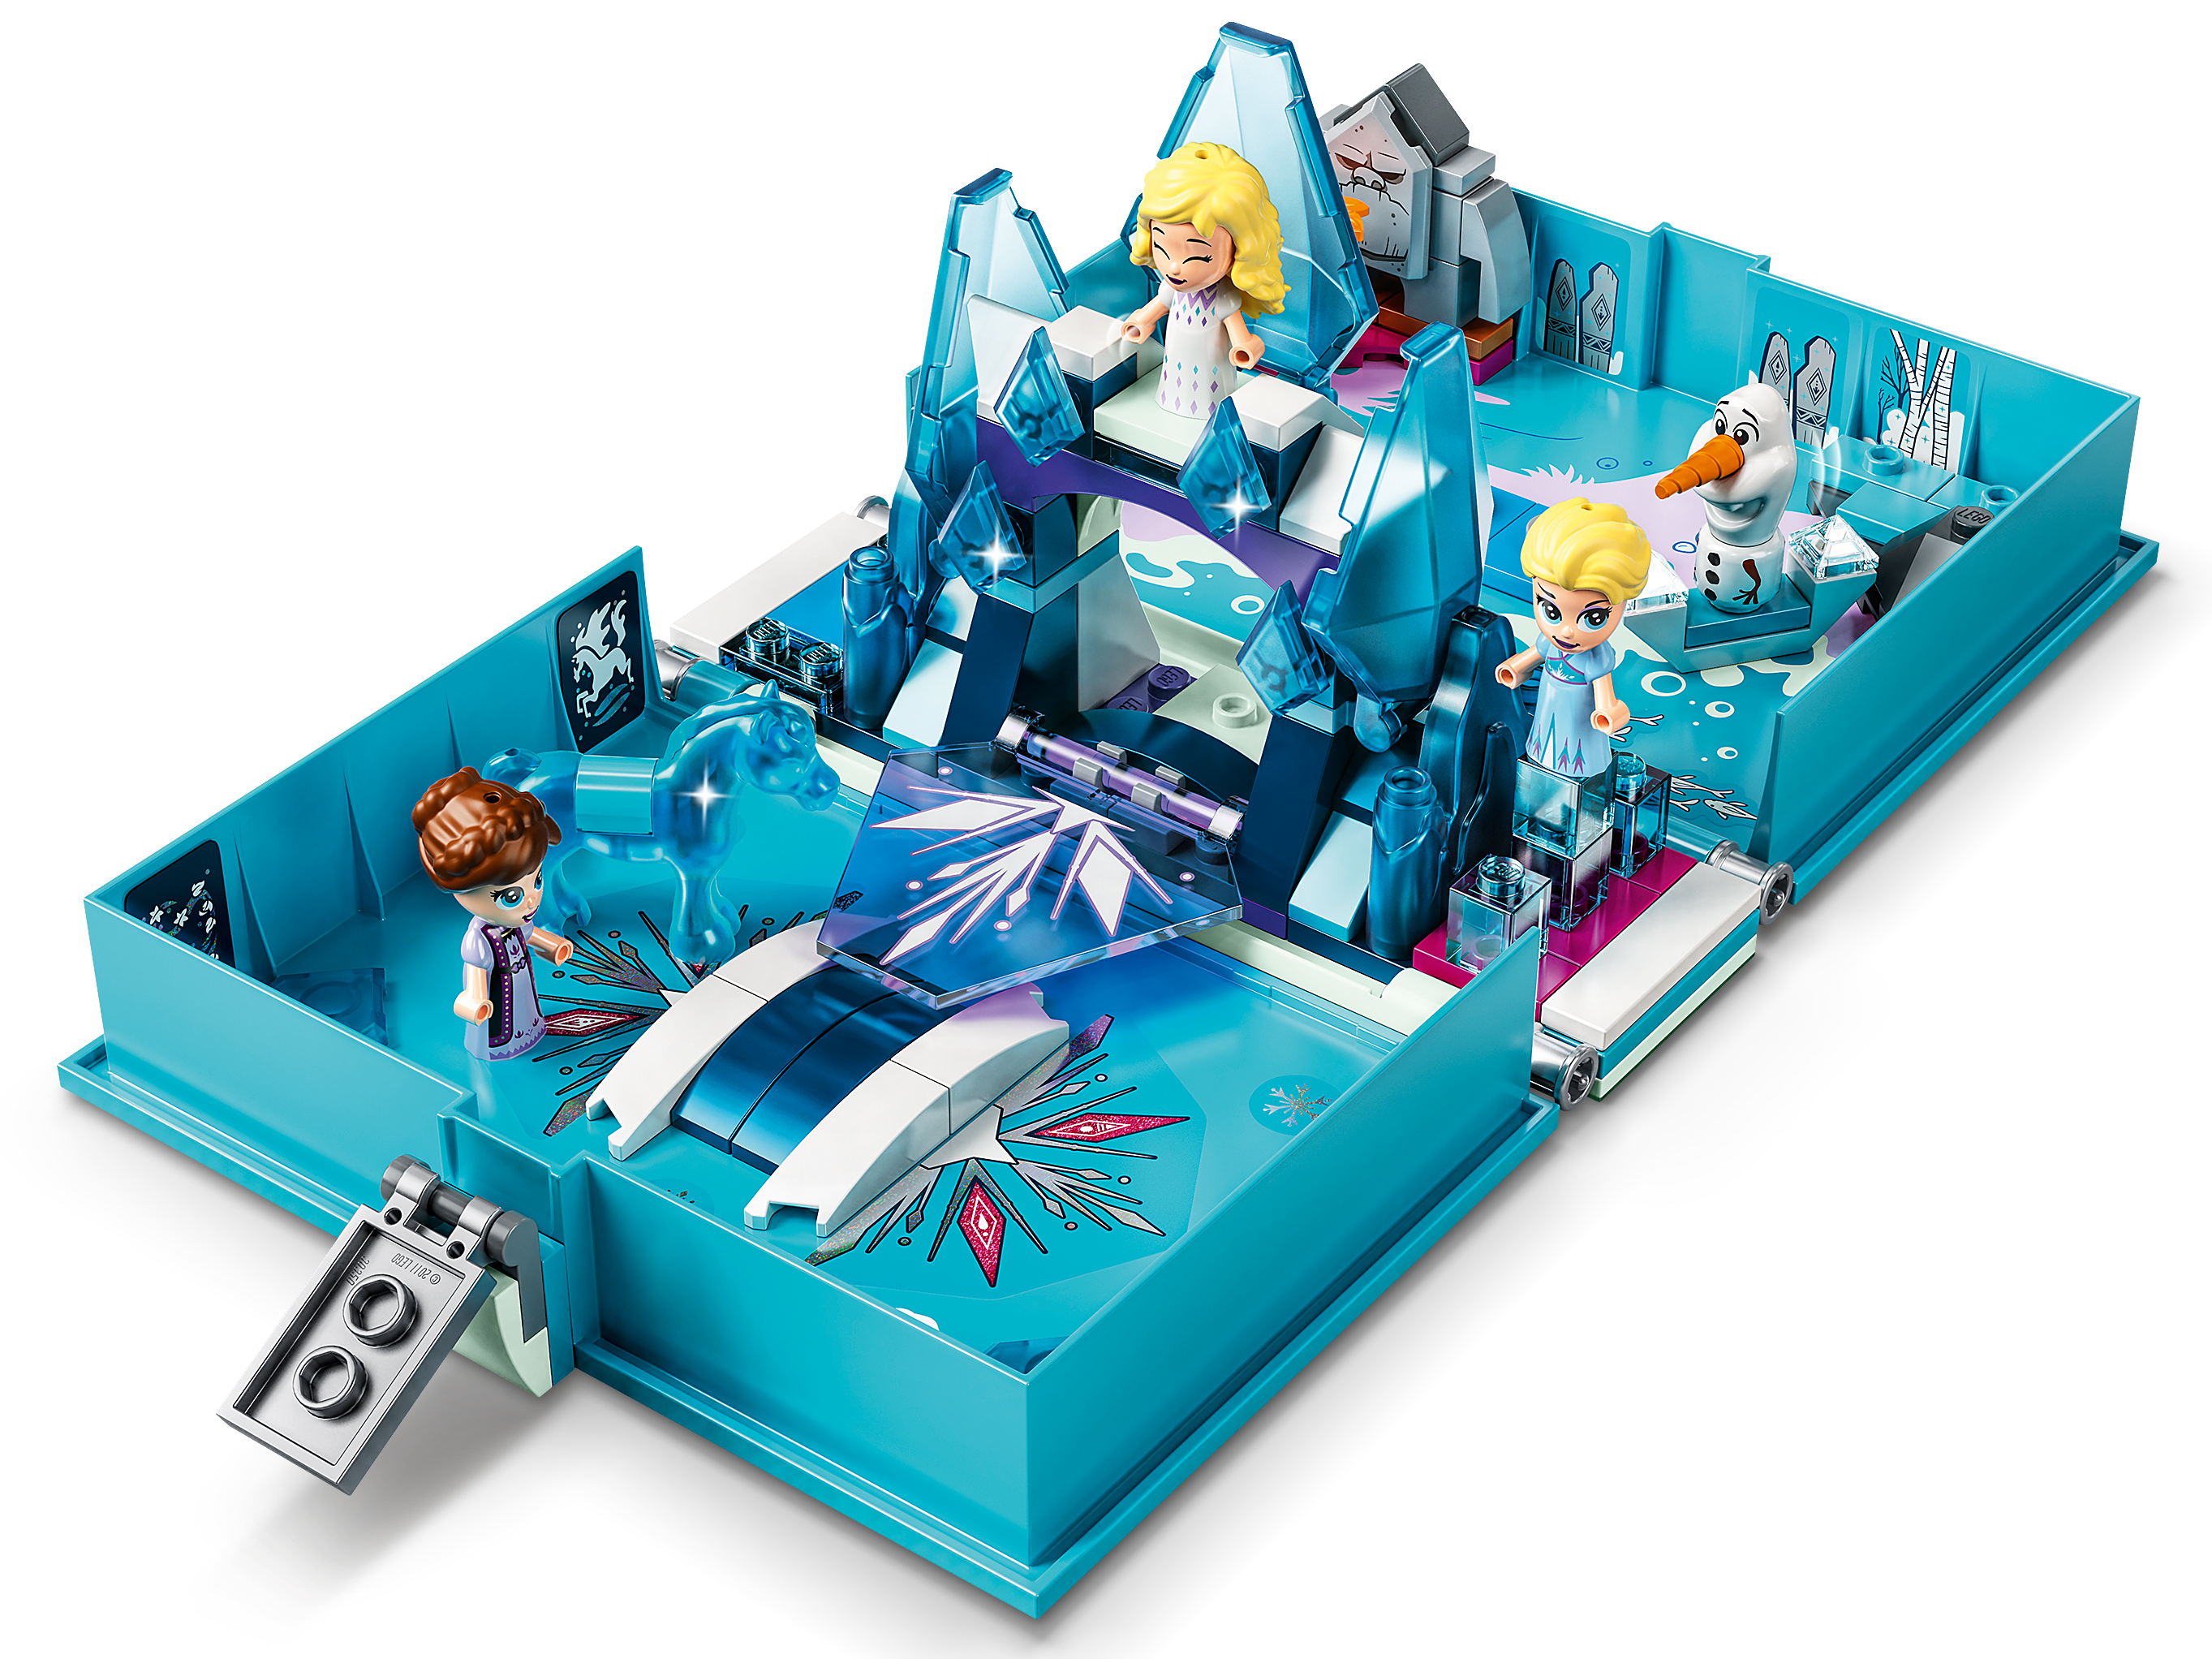 the Elsa Disney™ 43189 online at Nokk Adventures and | | the US Buy LEGO® Shop Storybook Official